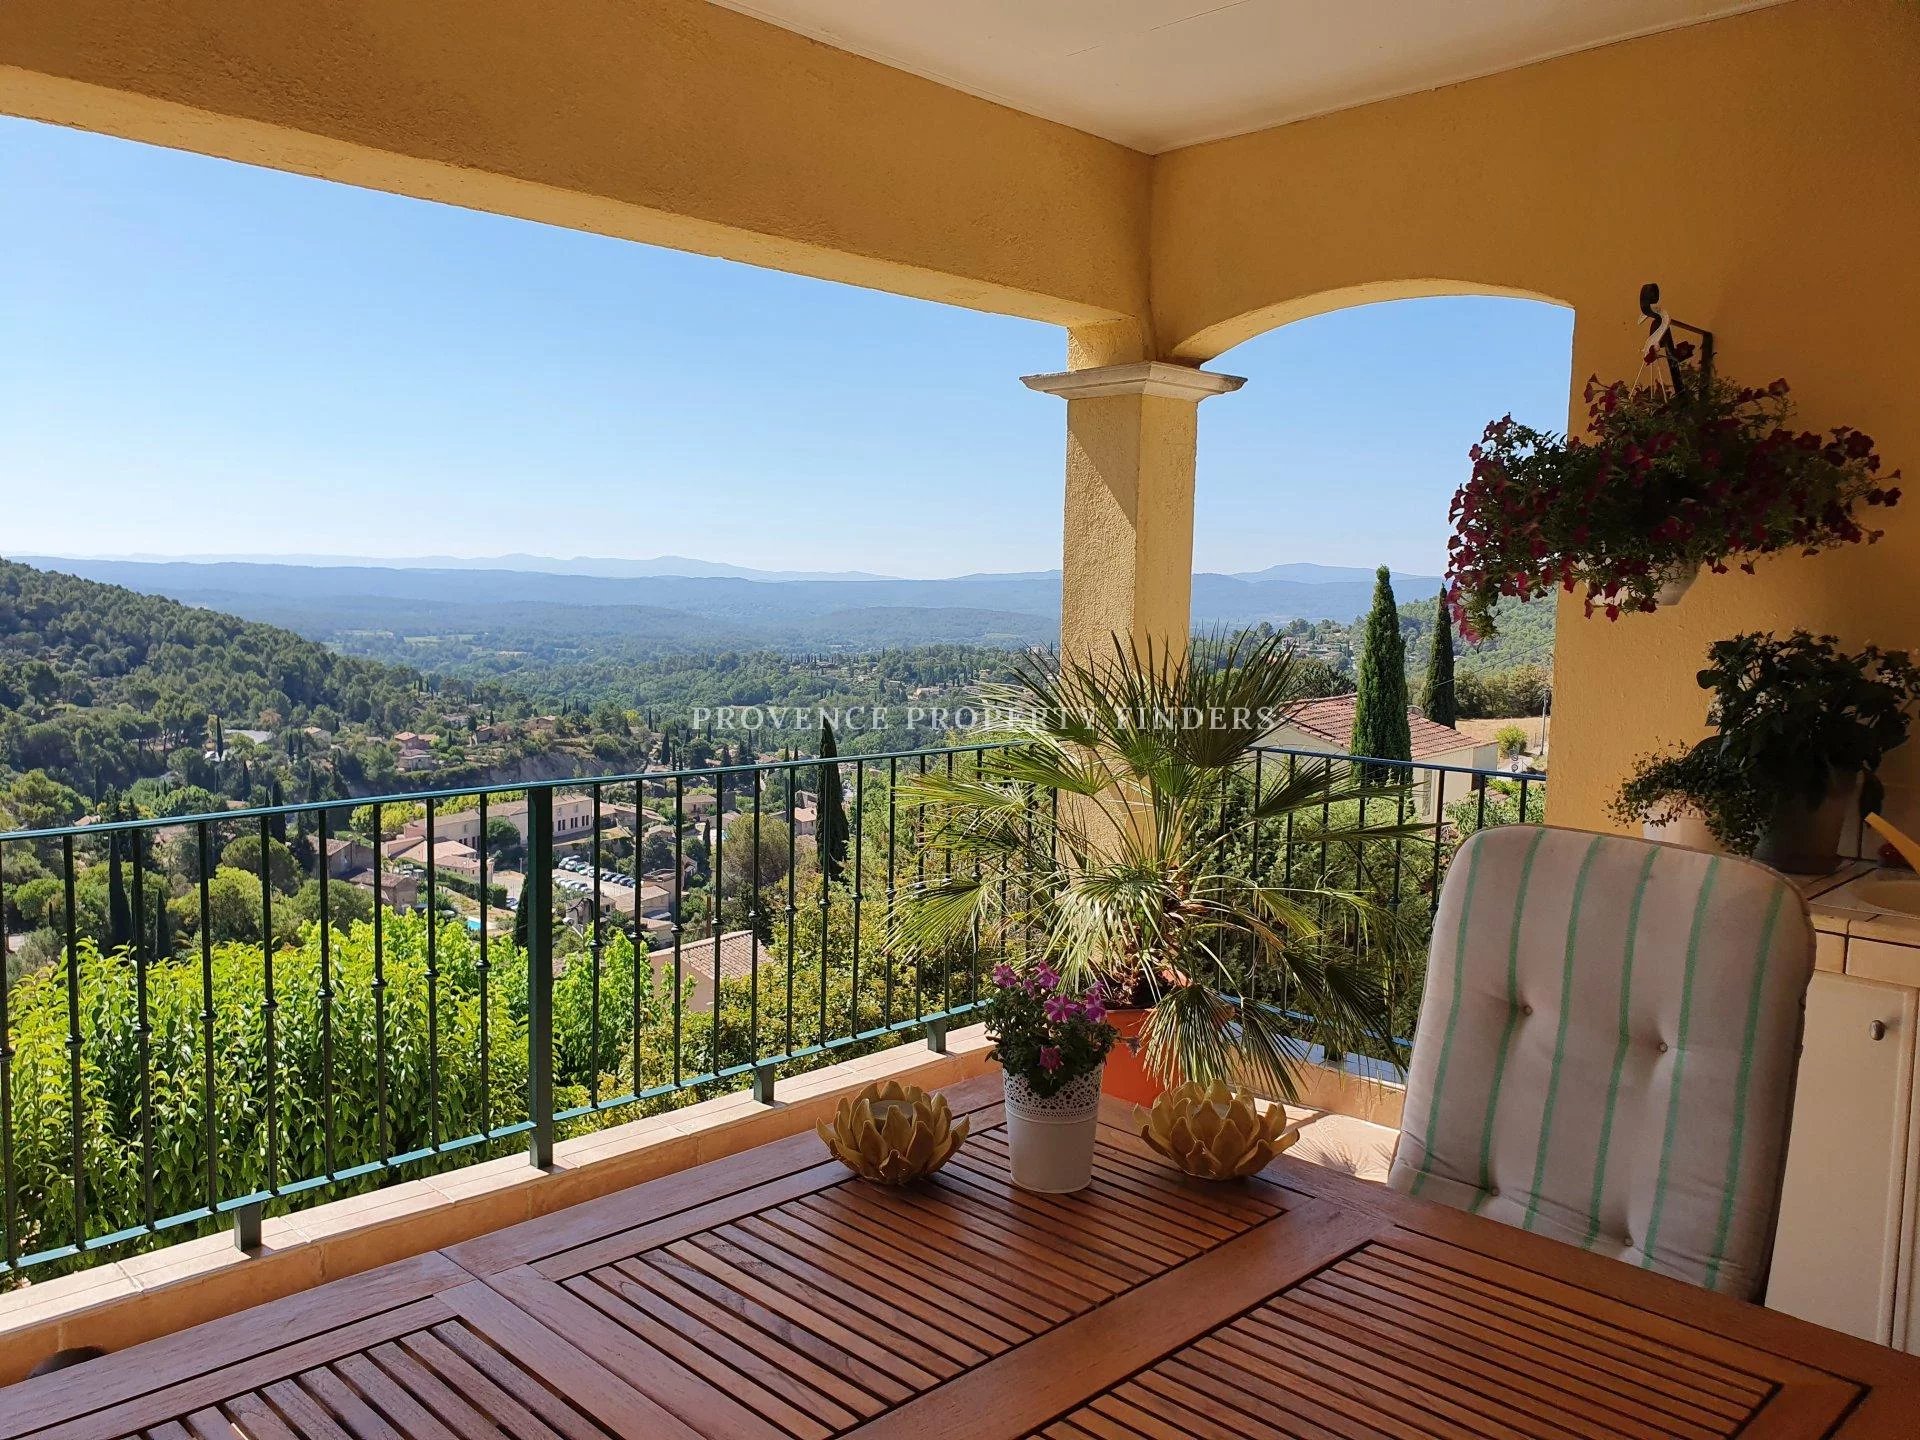 Cotignac, Villa in the Provence with a beautiful view!